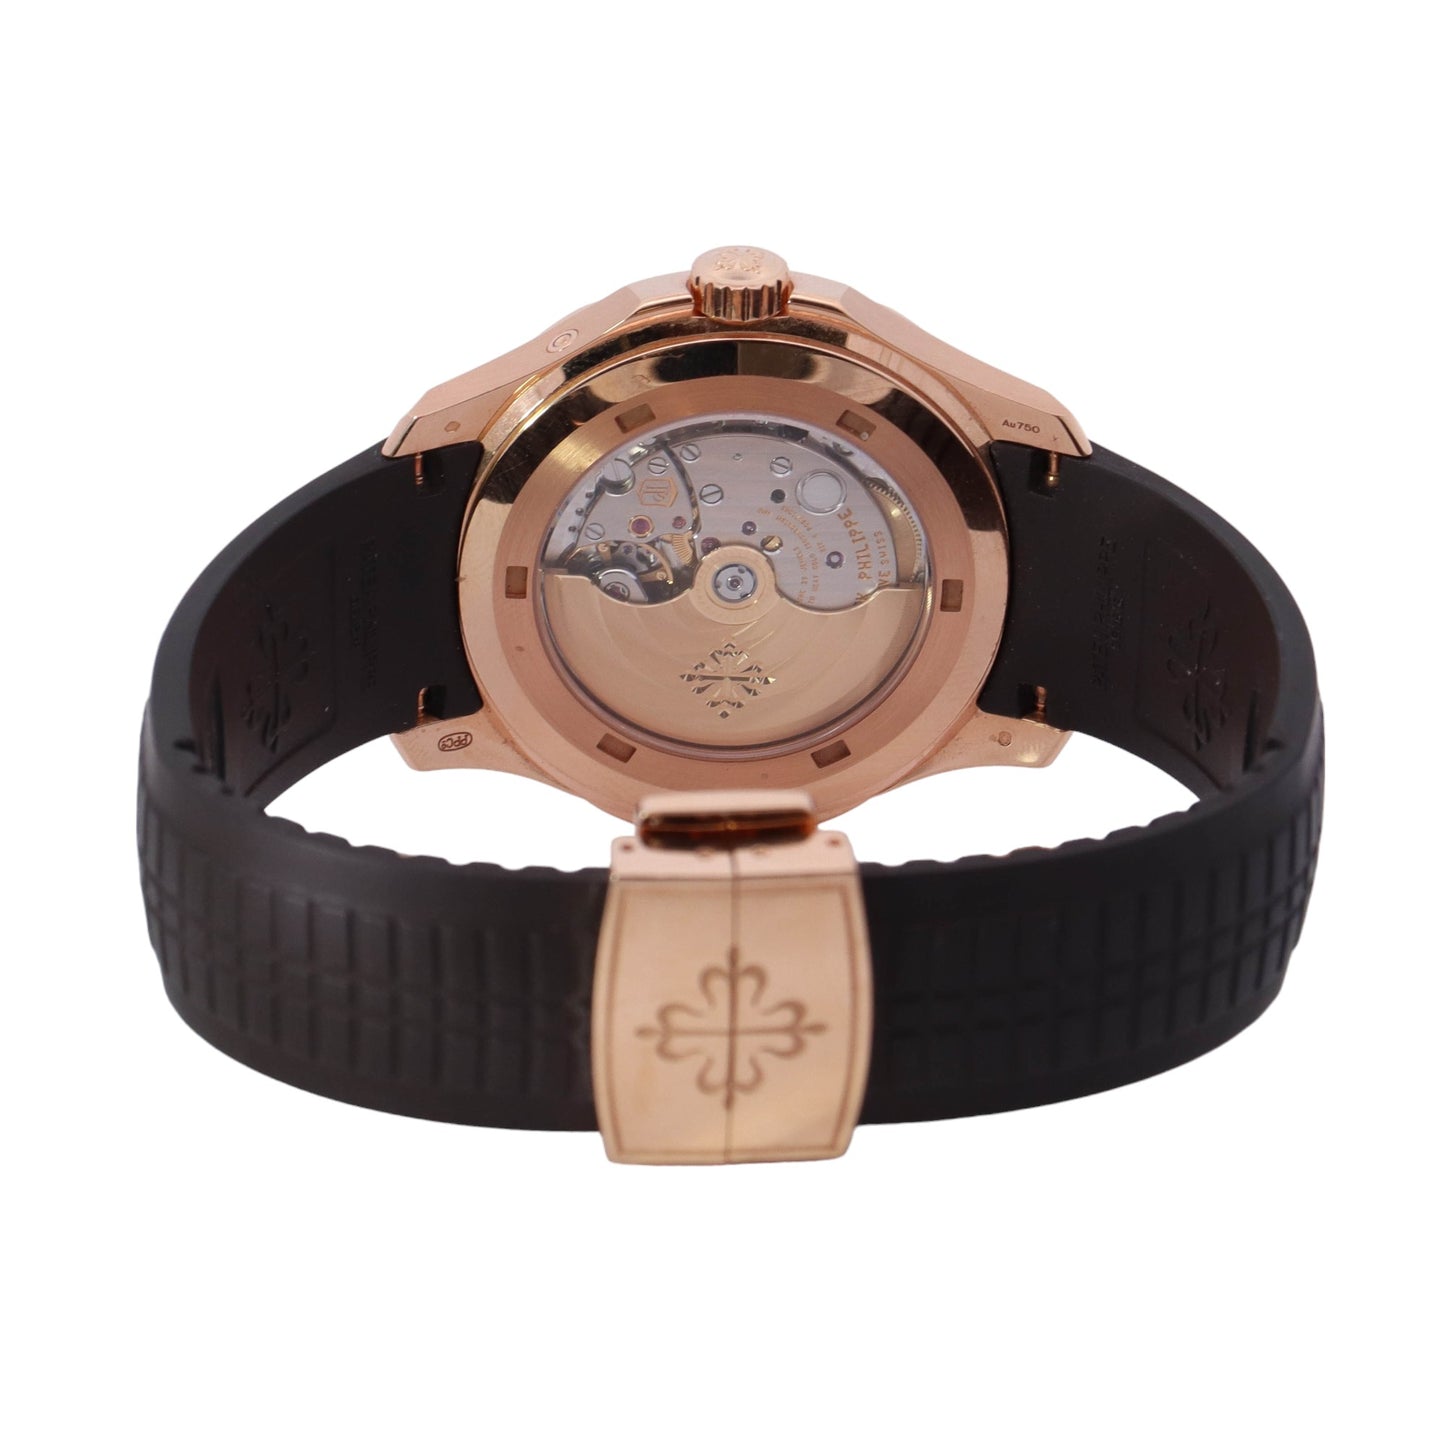 Patek Philippe Aquanat Rose Gold 40.8mm Brown Arabic Dial Watch Reference# 5164R-001 - Happy Jewelers Fine Jewelry Lifetime Warranty